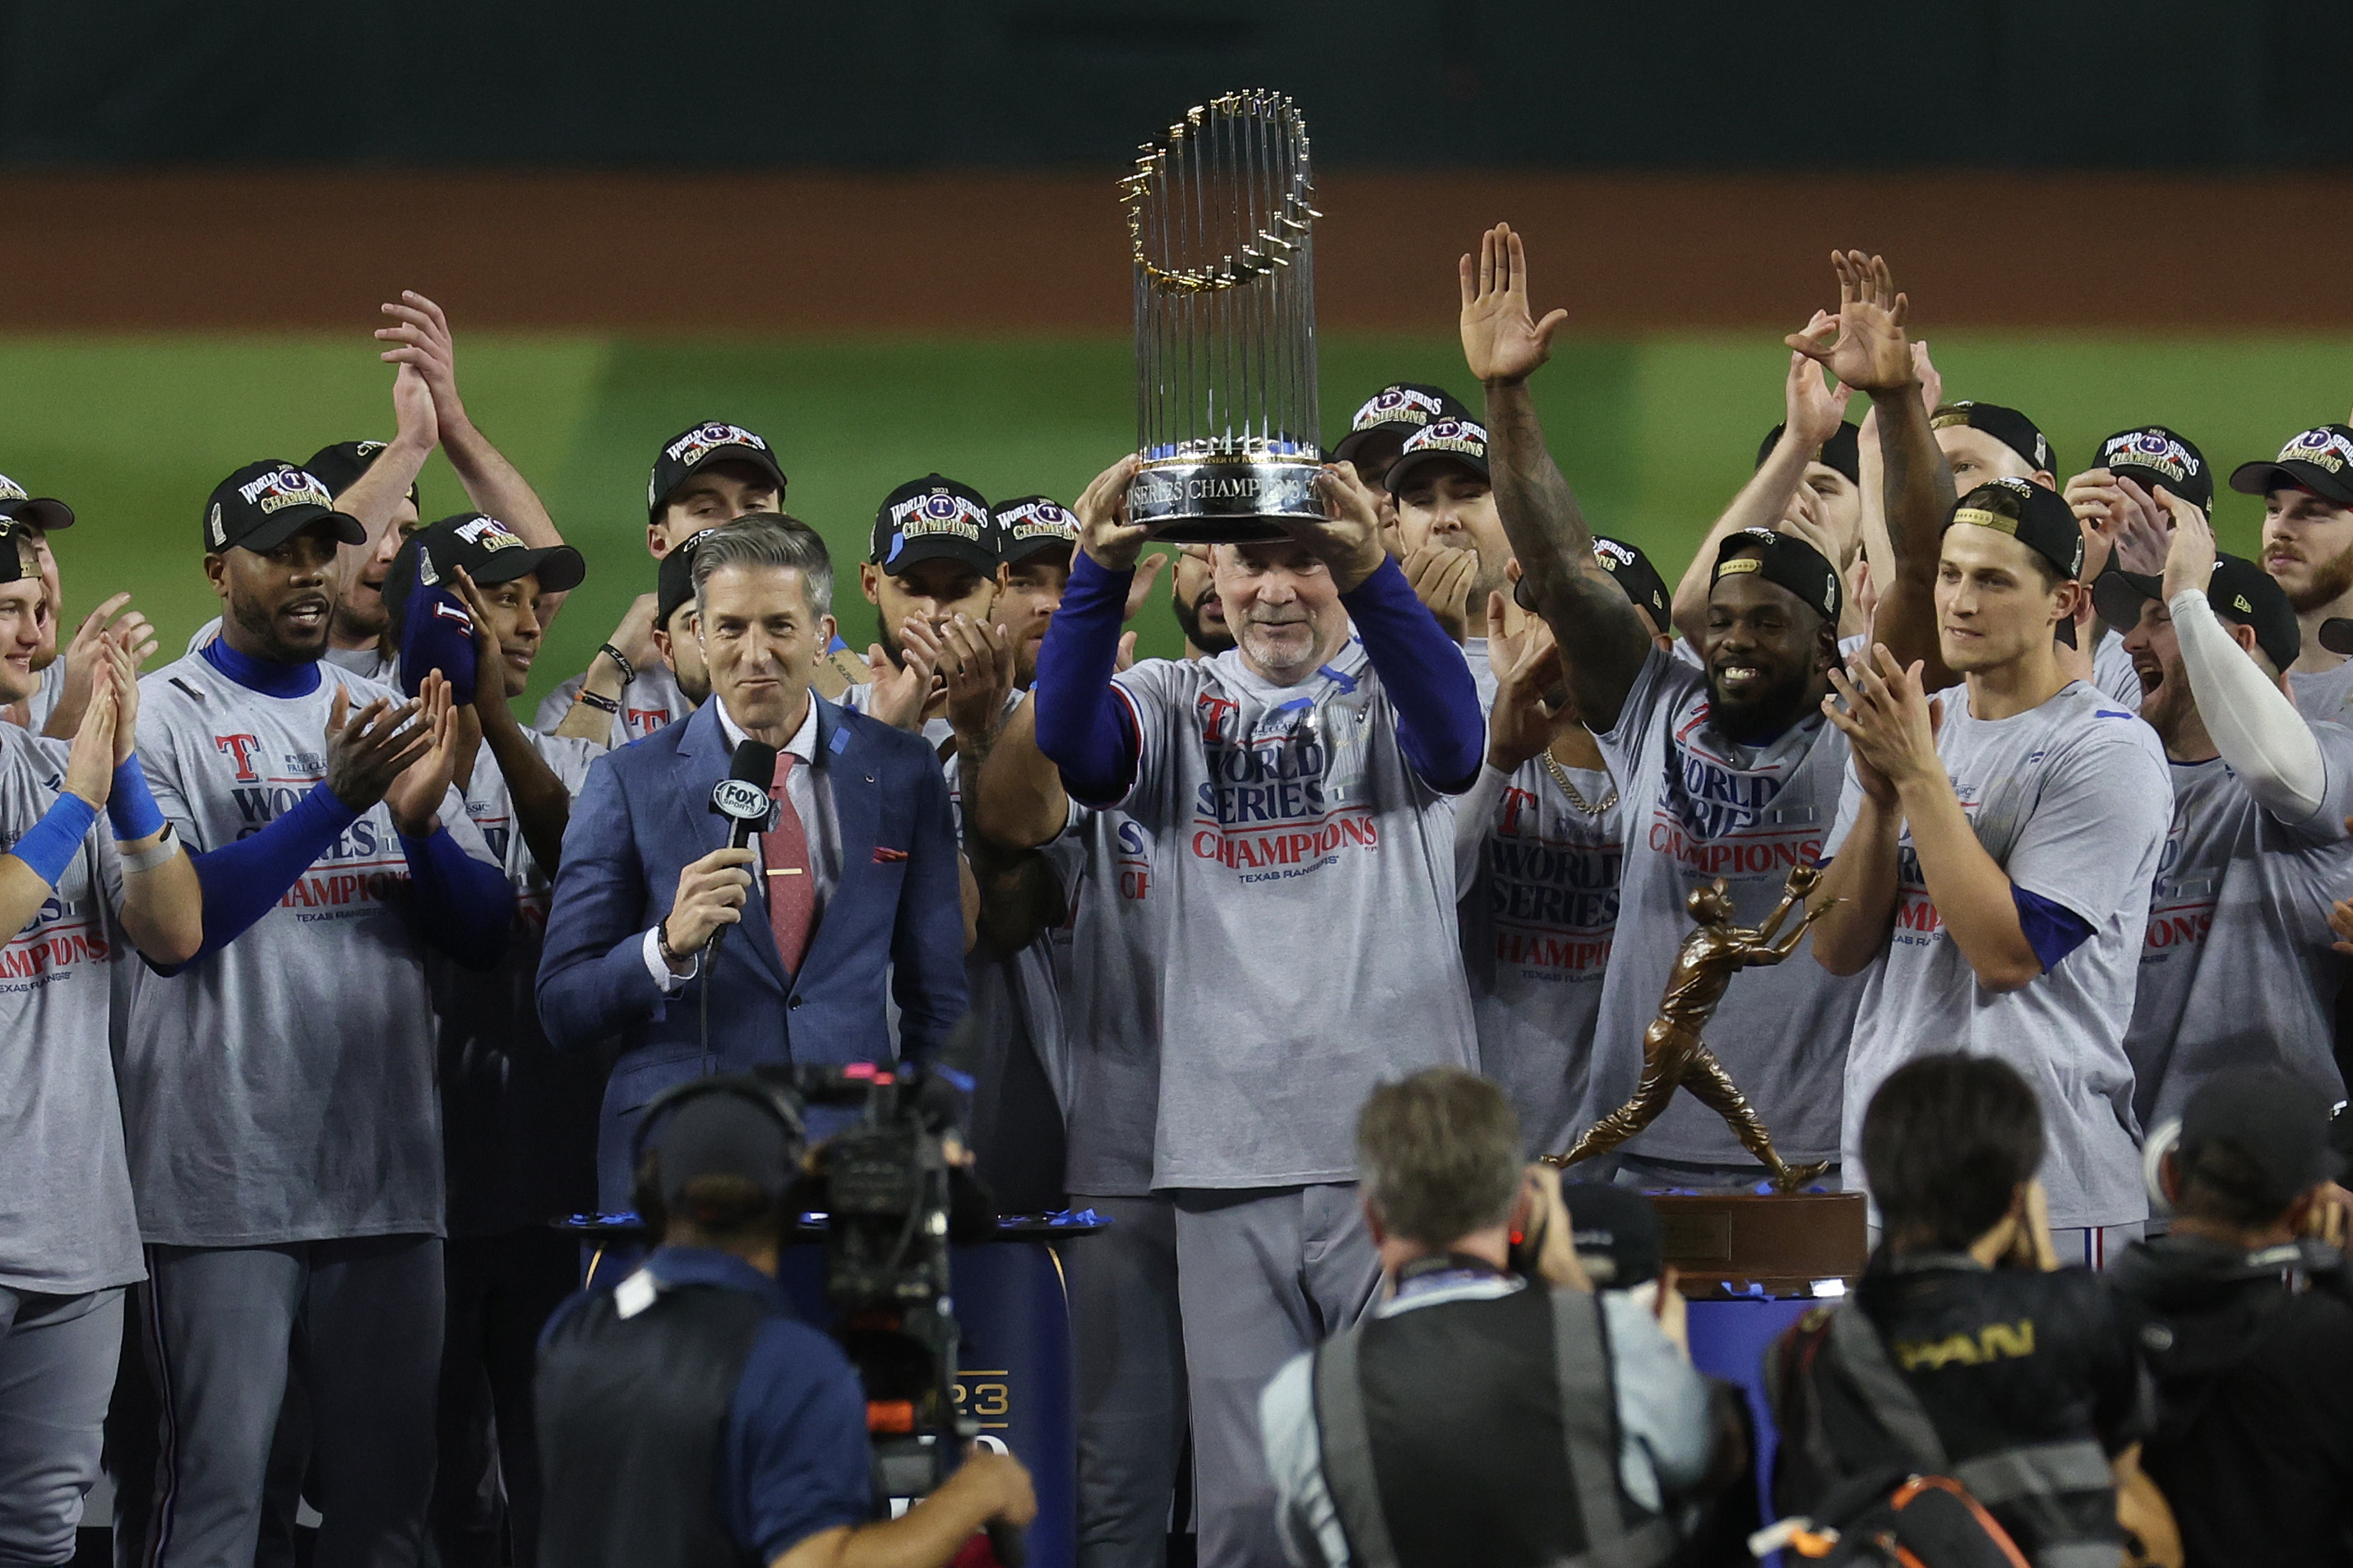 Bruce Bochy (C), manager of the Texas Rangers, lifts up the Commissioner's Trophy to celebrate their 5-0 win over the Arizona Diamondbacks in Game 5 of the World Series at Chase Field in Phoenix, Arizona, November 1, 2023. /CFP